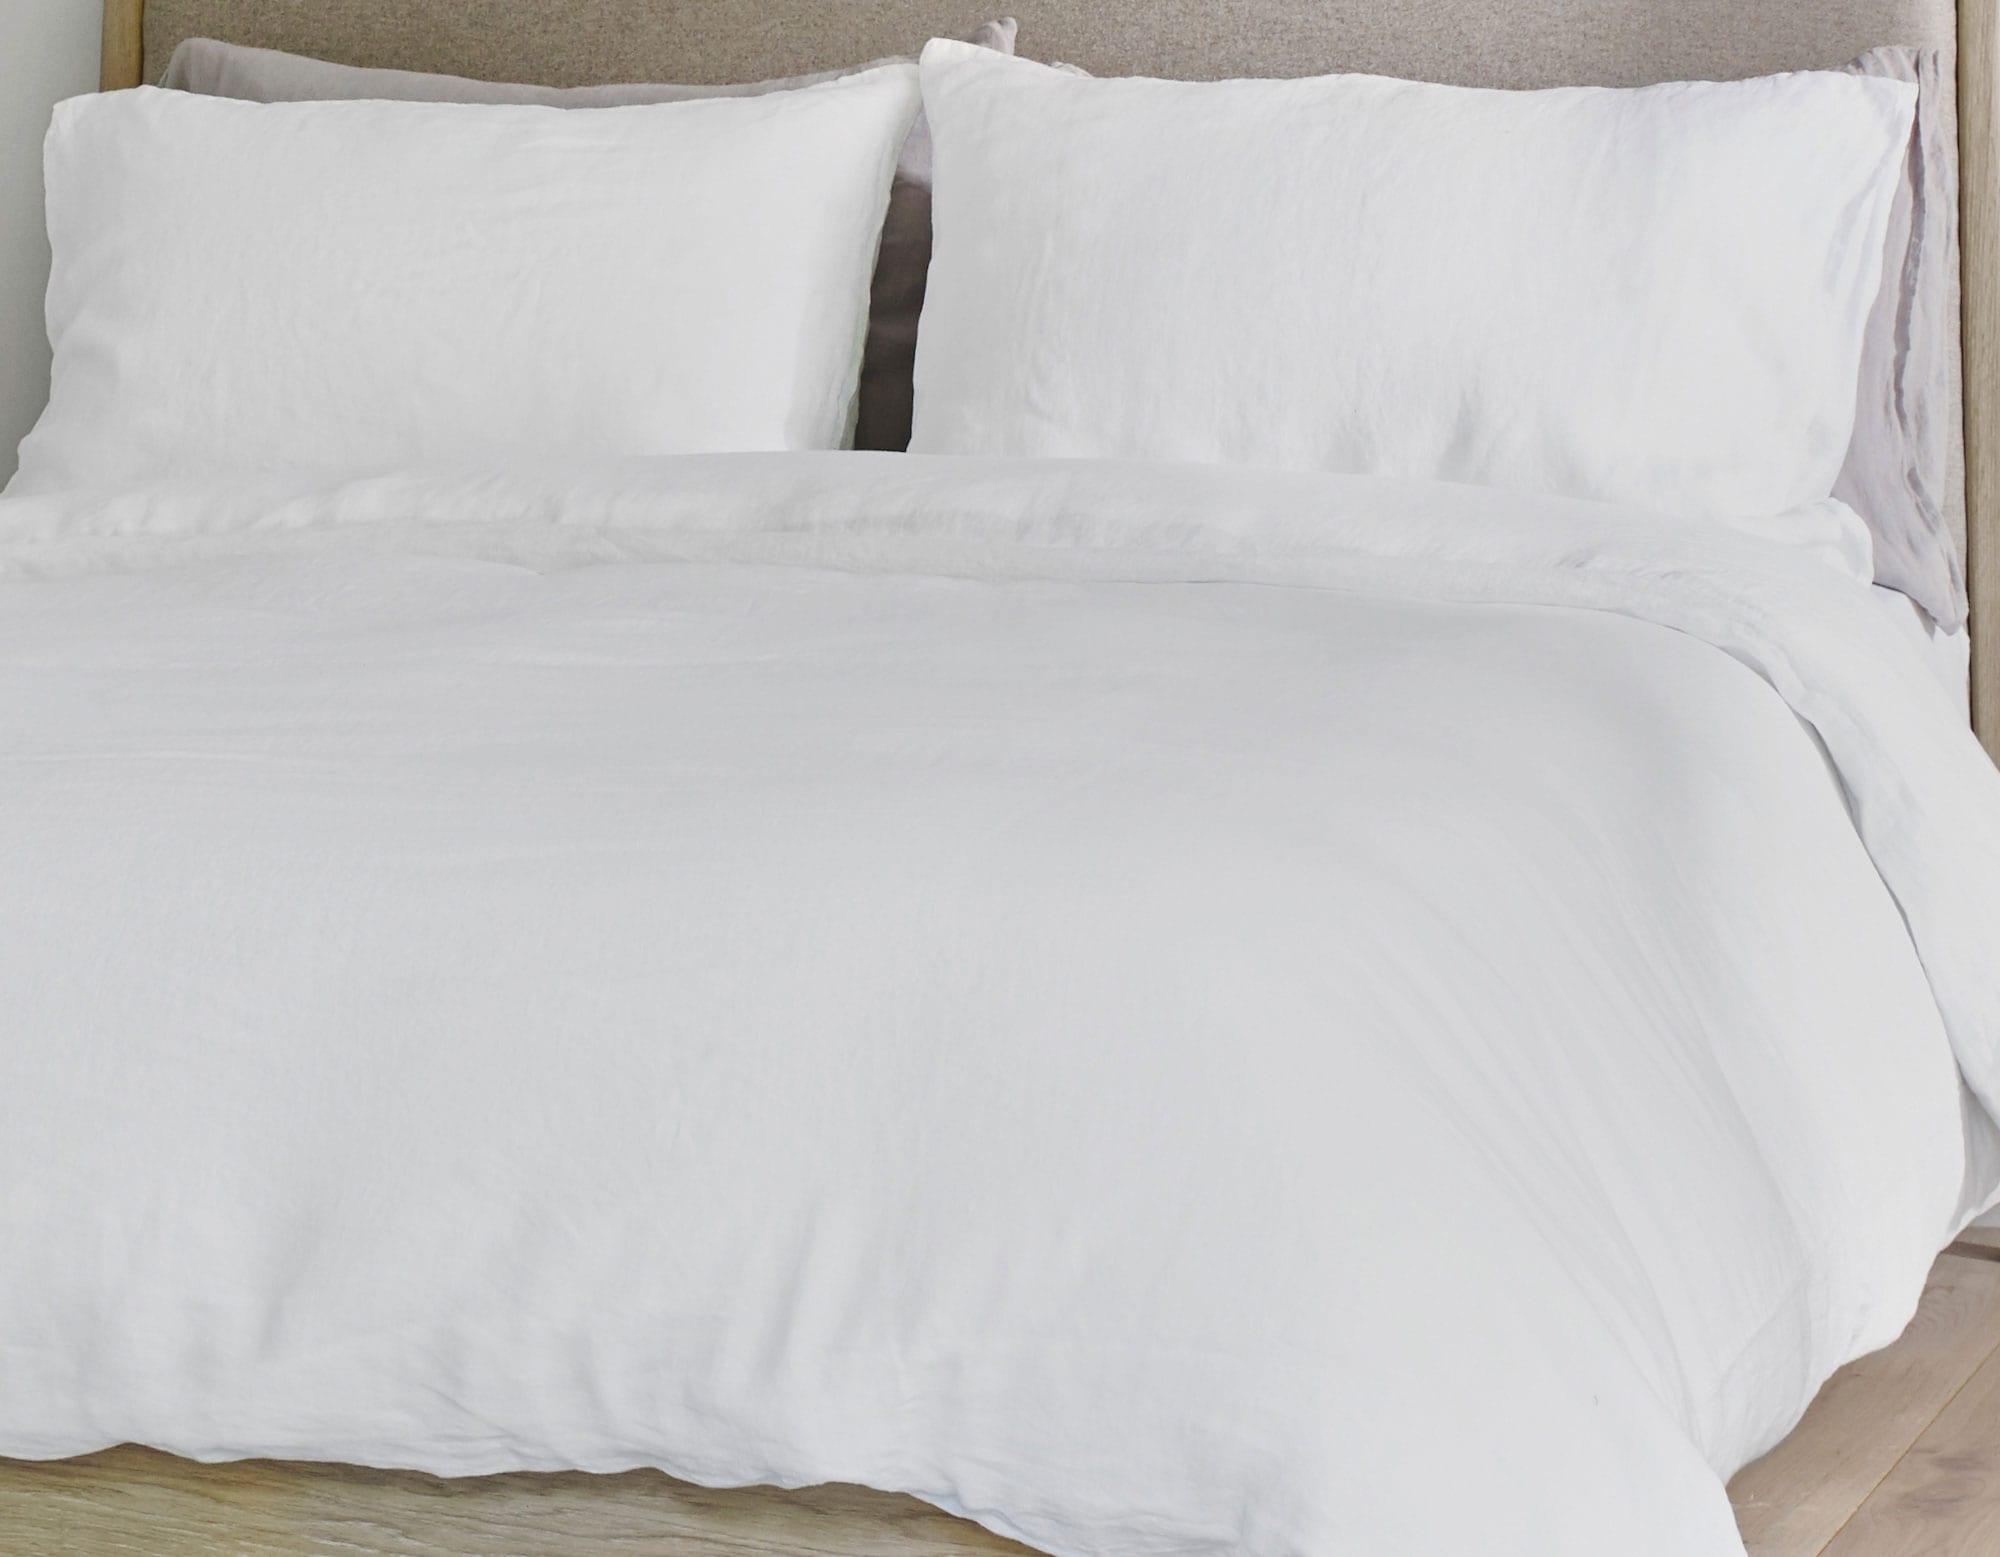 White linen bedding on bed showing duvet cover, pillowcases and fitted sheet